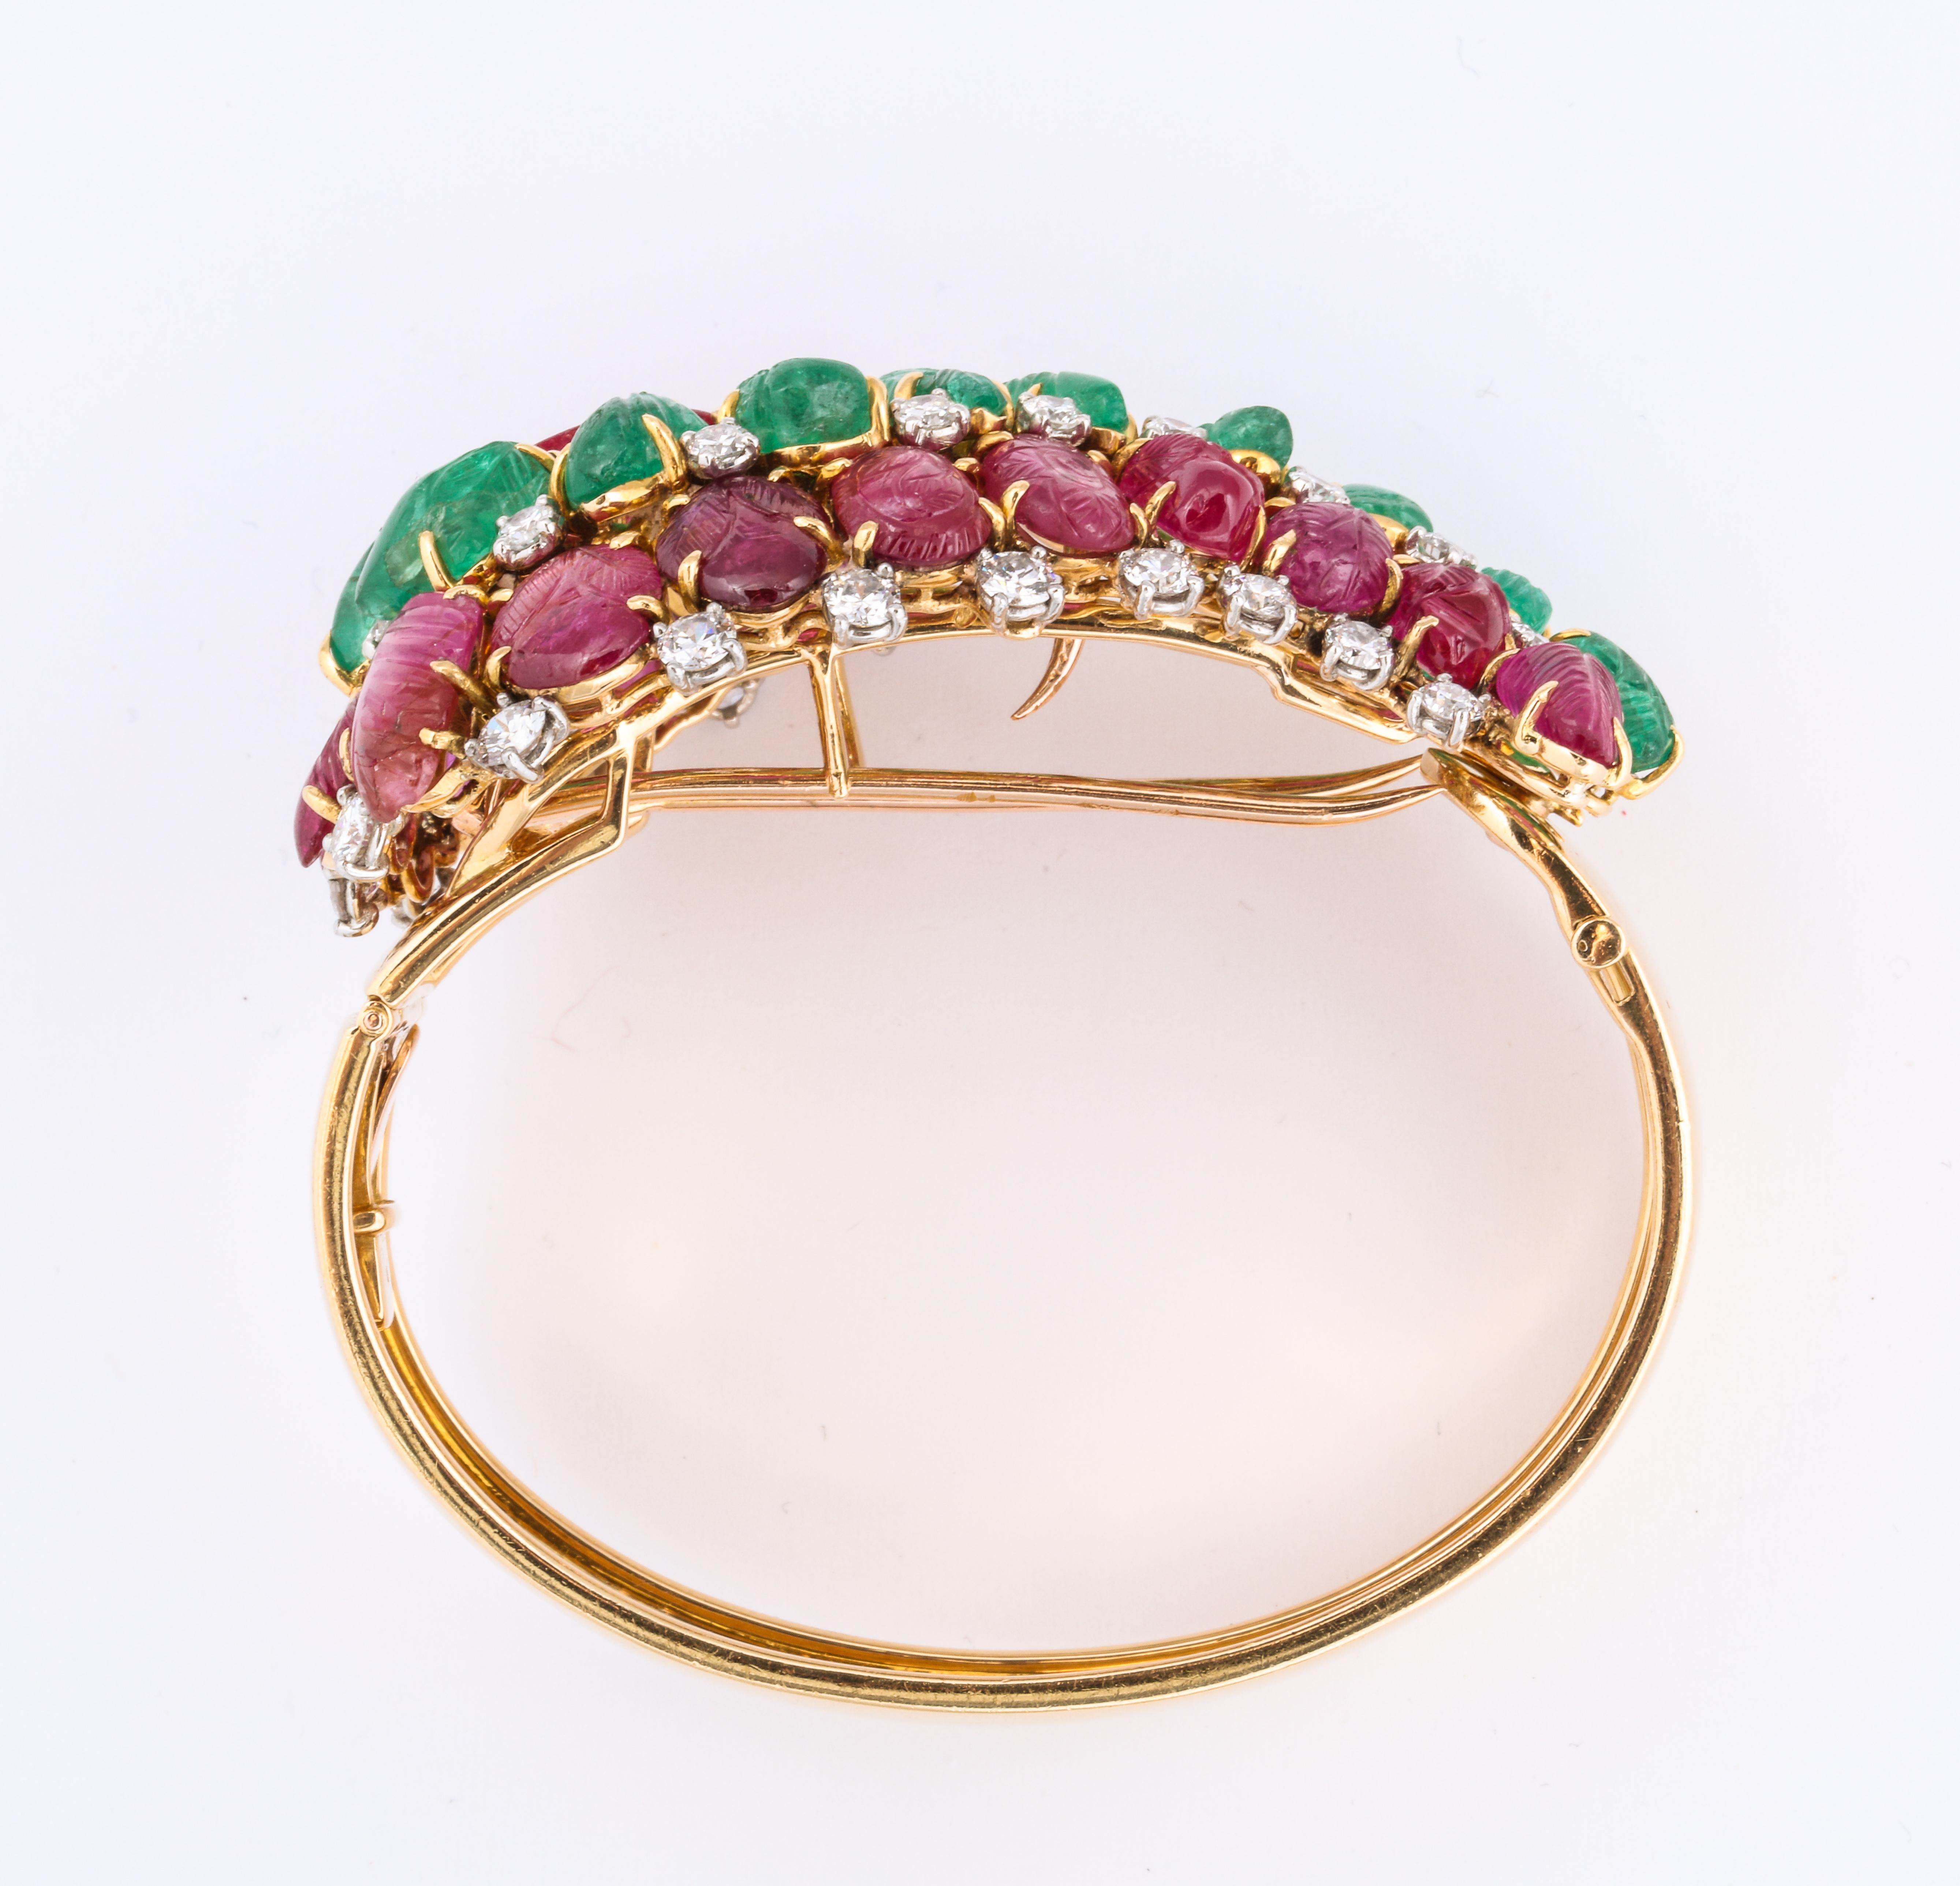 Cartier Tutti Frutti Bangle Brooch Combination In Excellent Condition For Sale In New York, NY